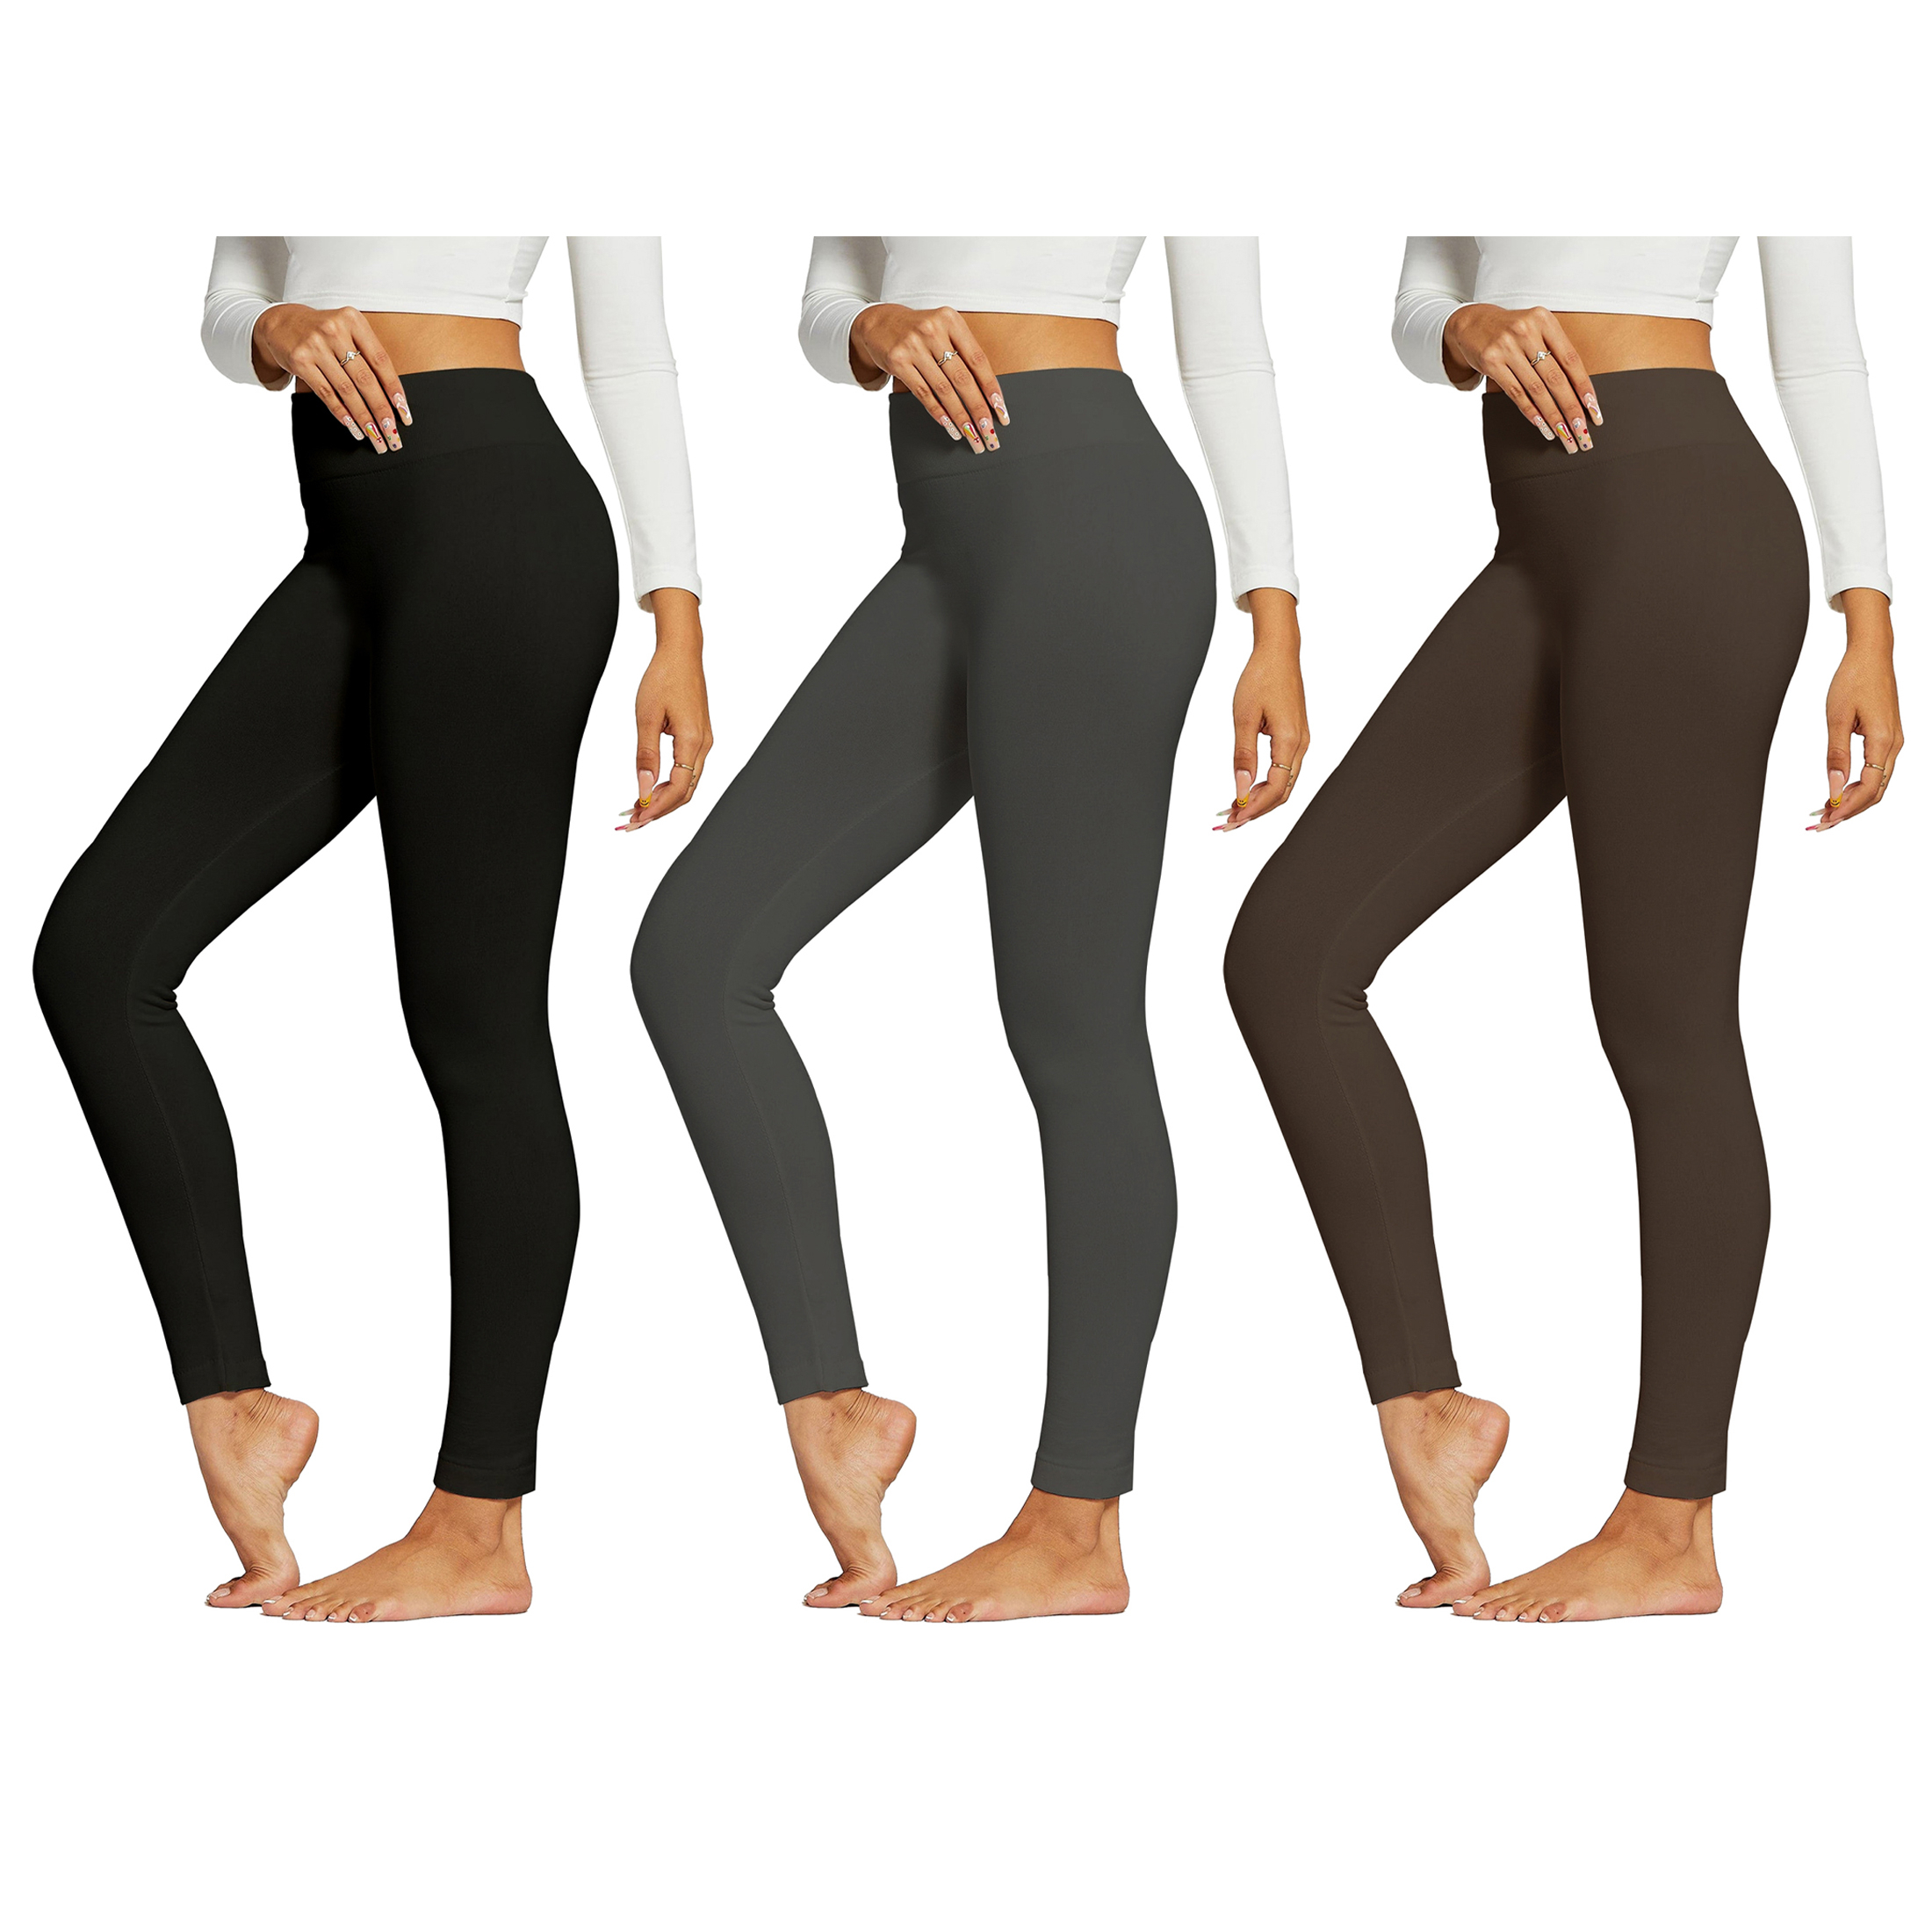 3-Pack:Women's Premium Quality High-Waist Fleece-Lined Leggings (Plus Size Available) - Black, Grey & Red, Small/Medium